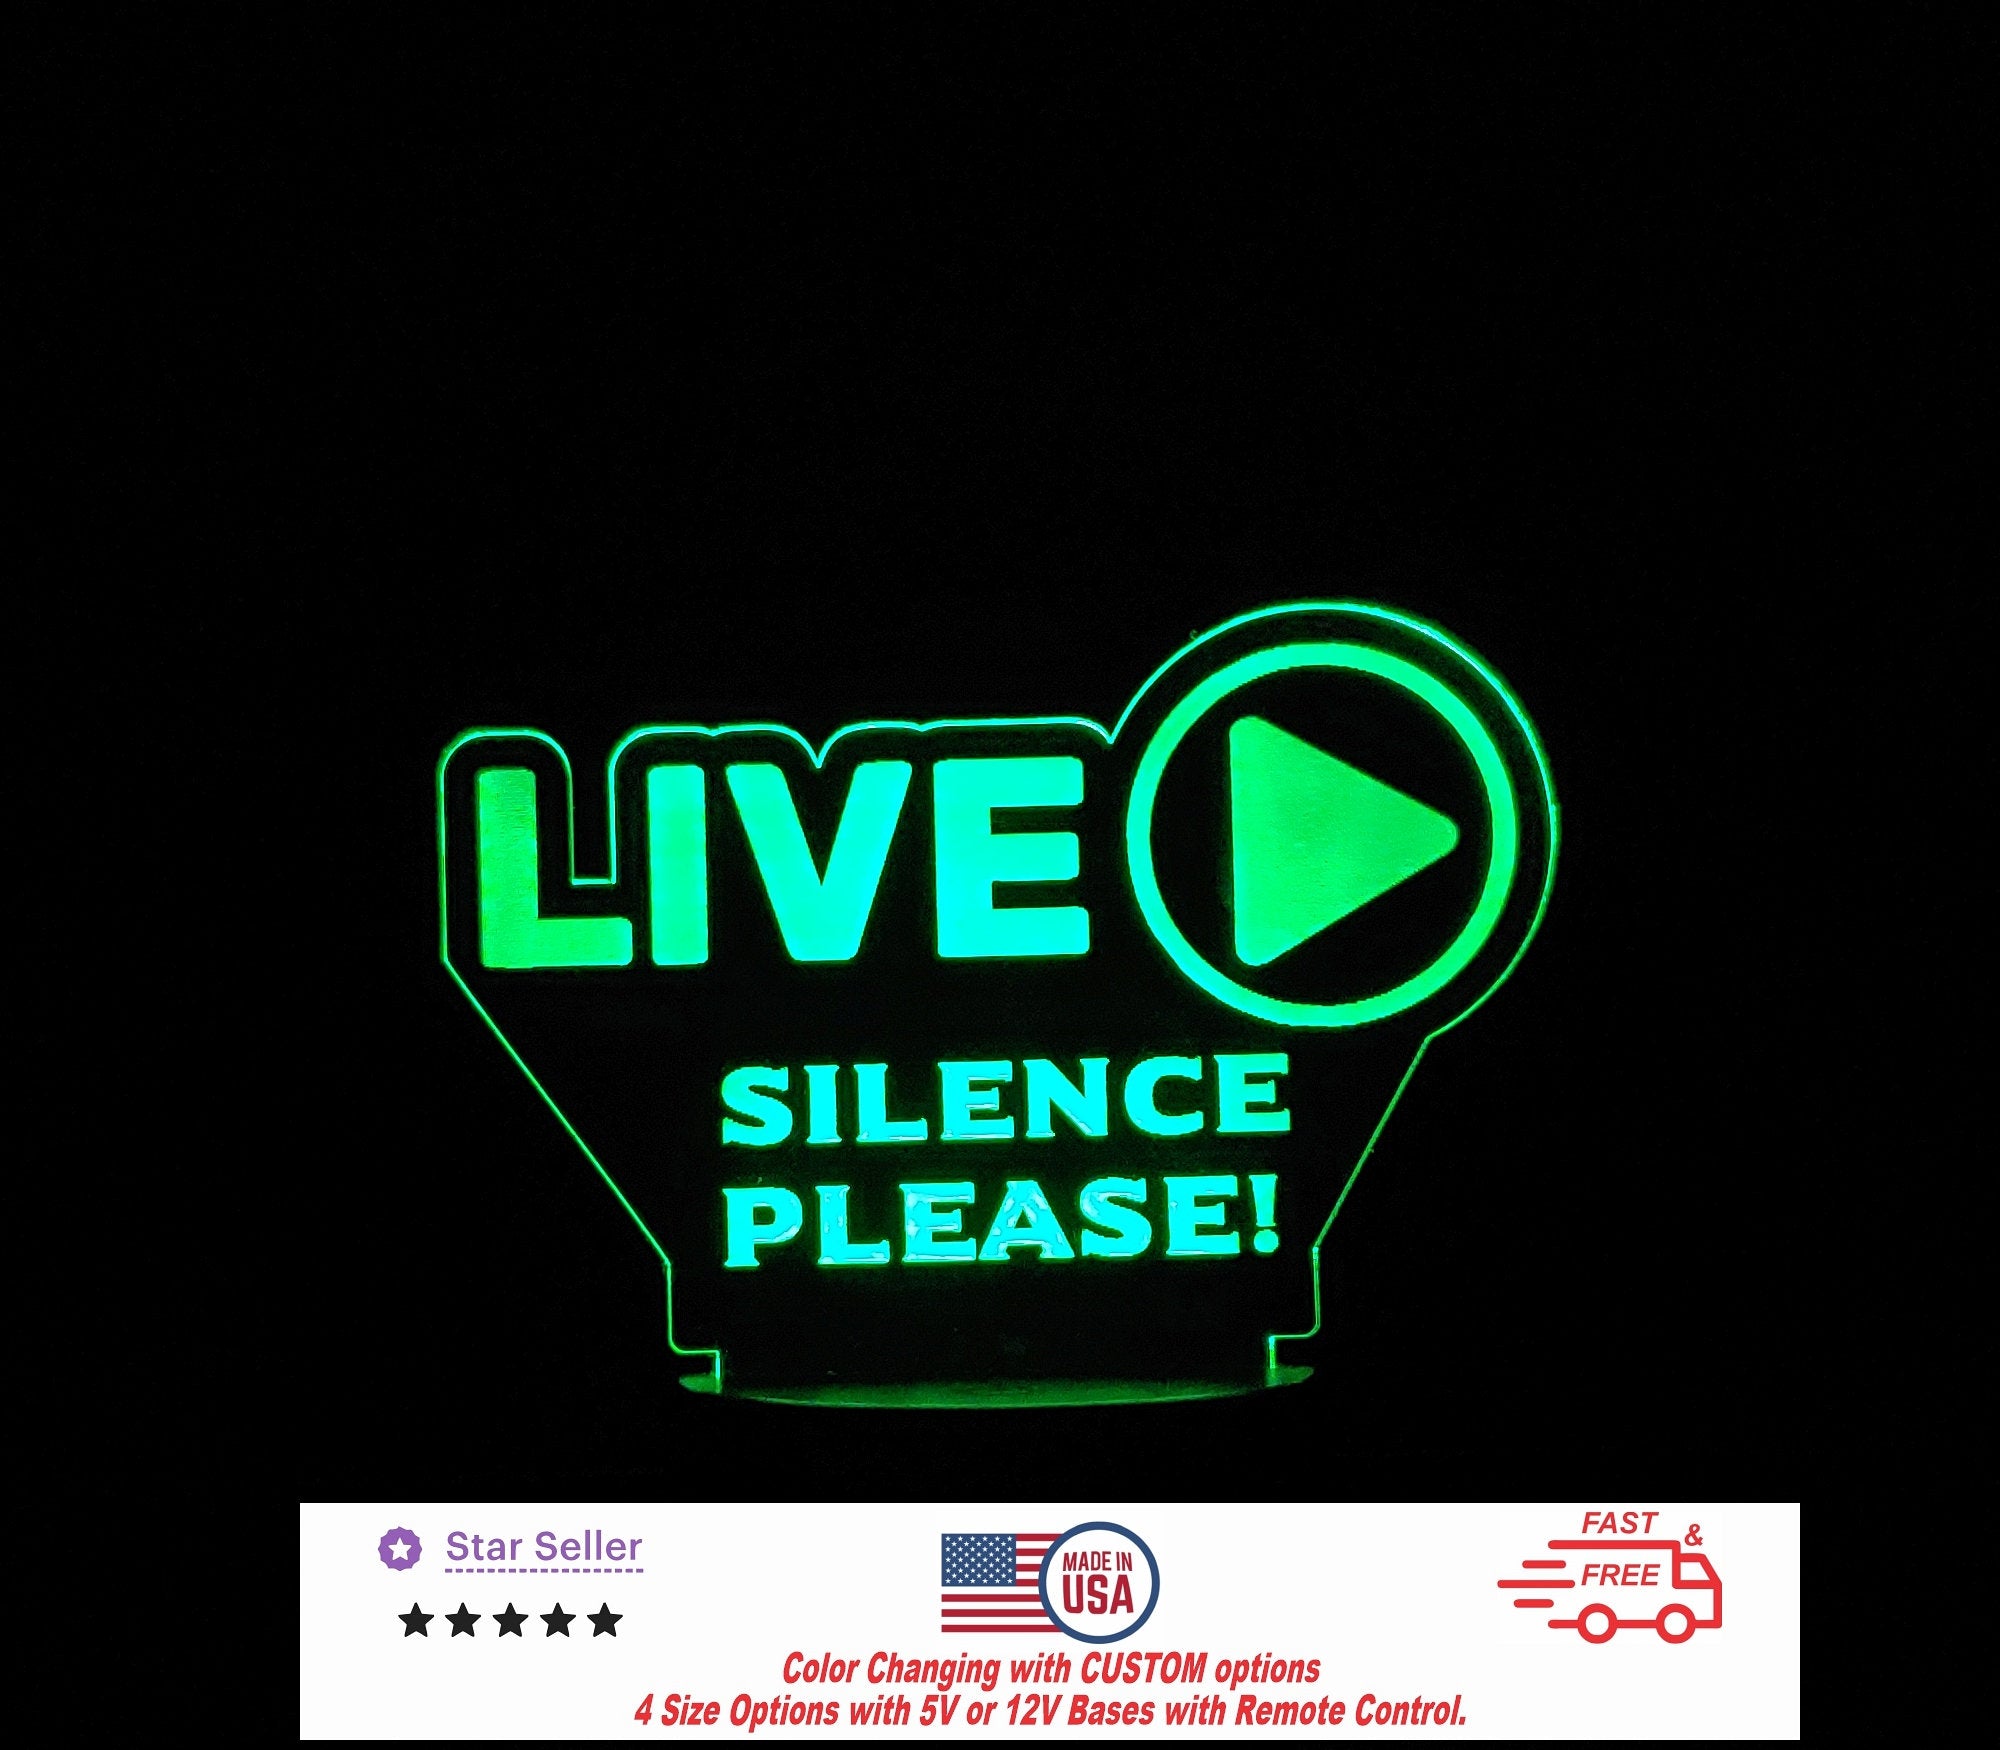 Live Silence Personalized LED Night Light - Neon sign, Room Decor, Recording Music, Stream, Music Studio 4 sizes Free Shipping Made in USA